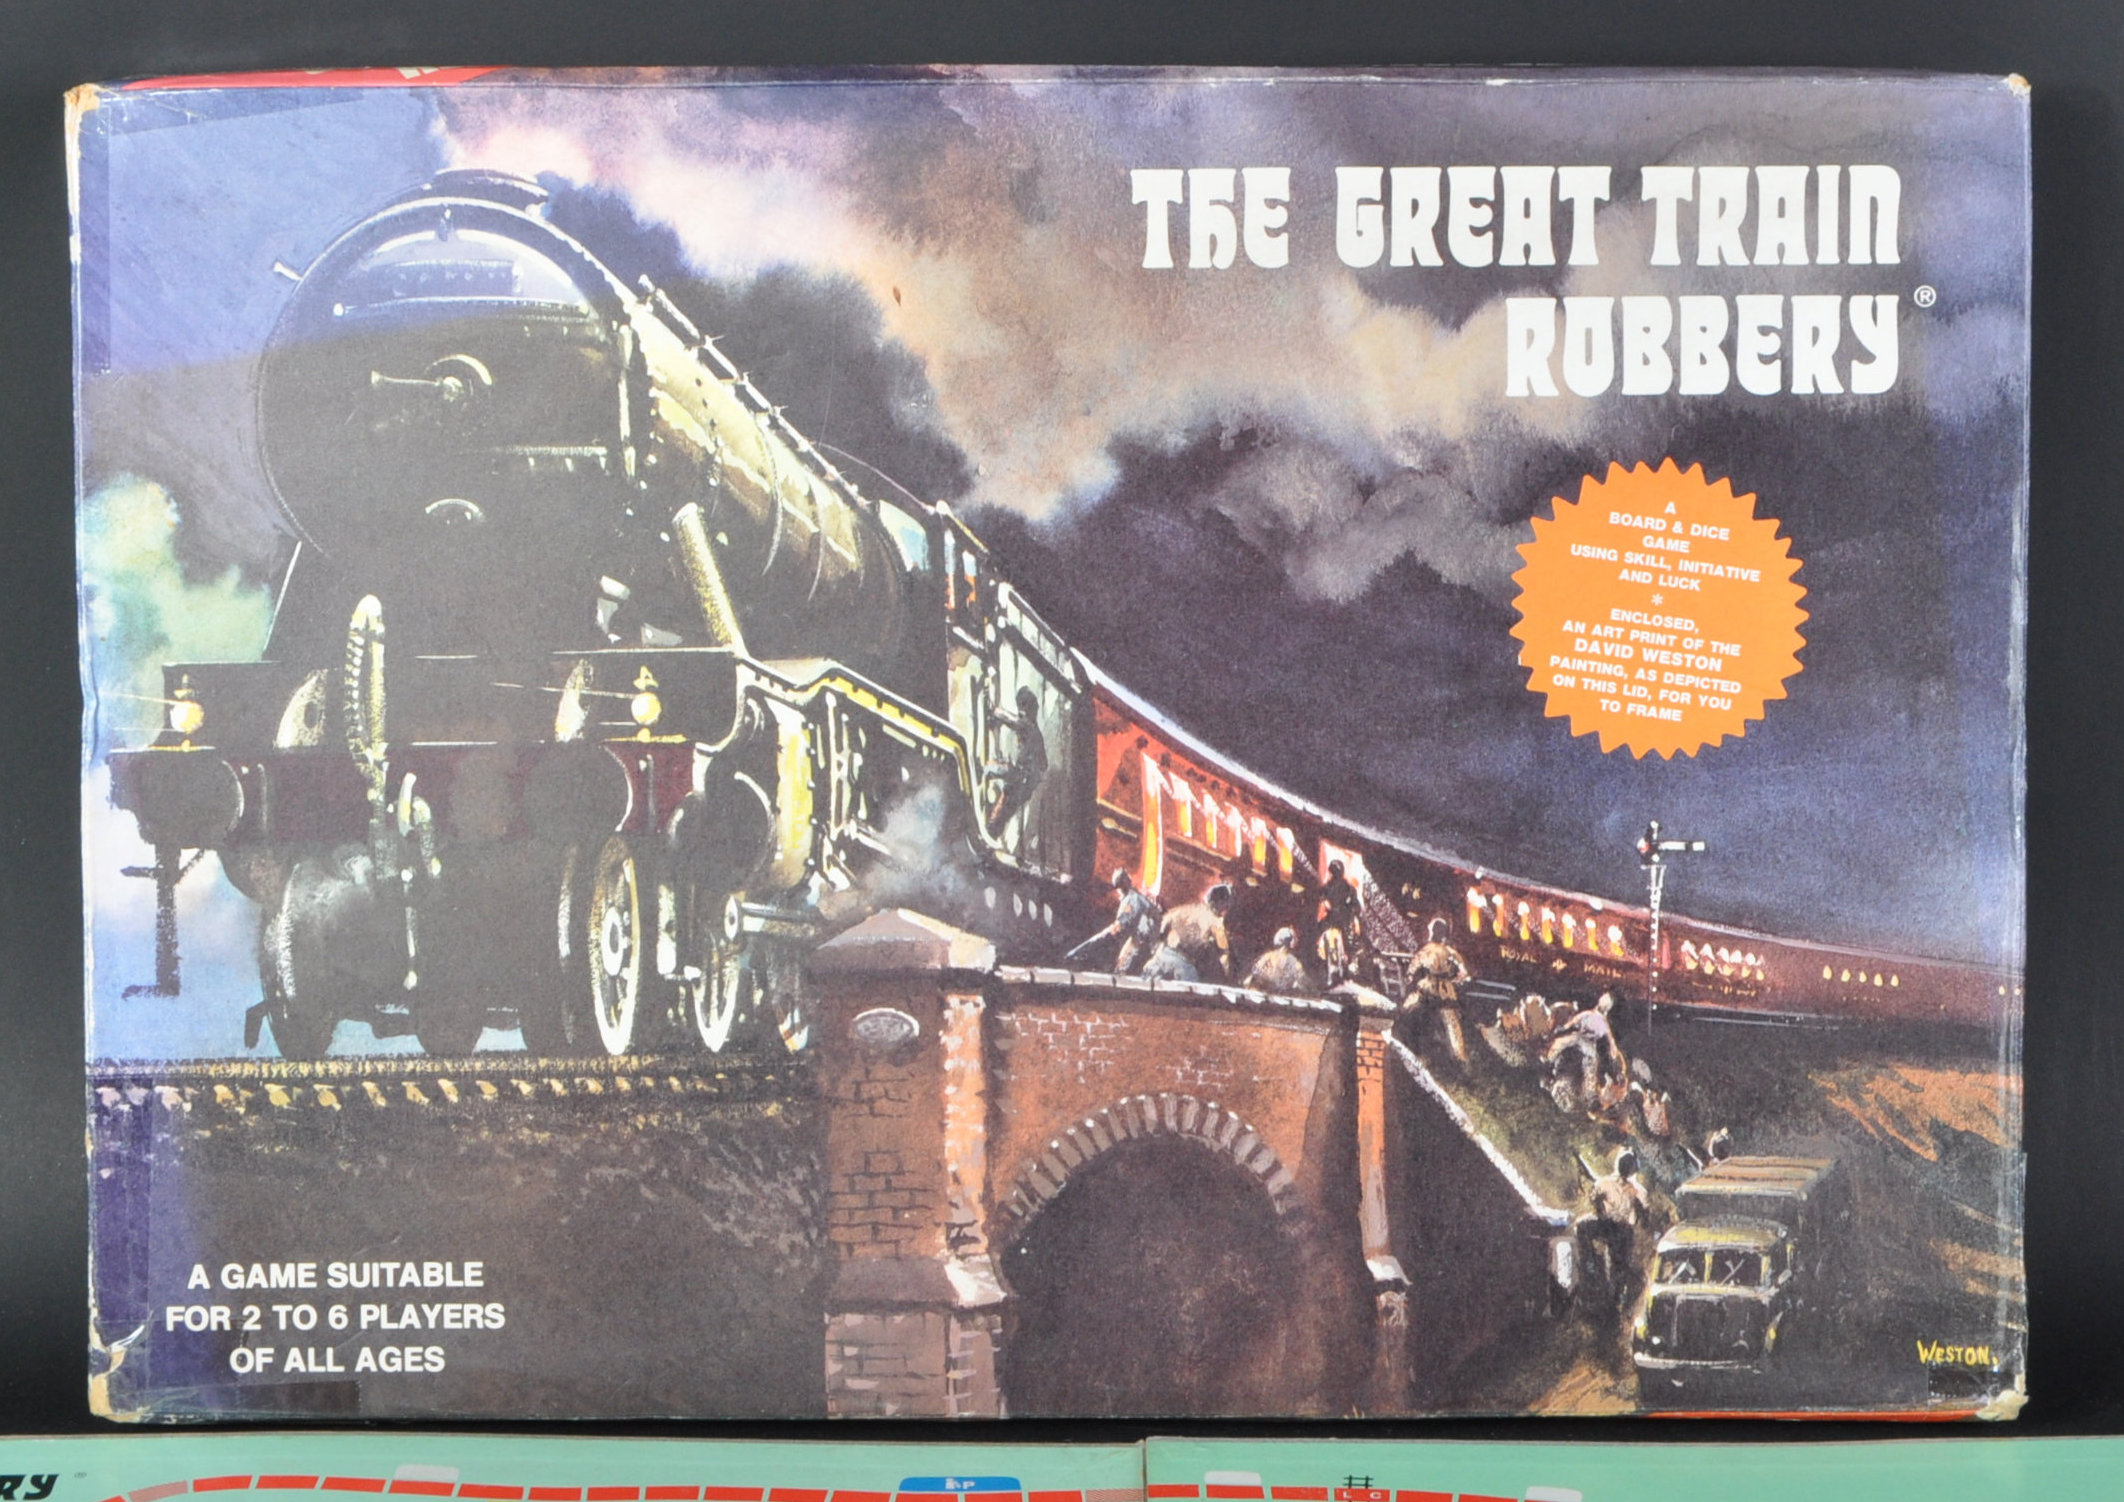 GREAT TRAIN ROBBERY - SCARCE 1970S BOARD GAME - Image 3 of 9